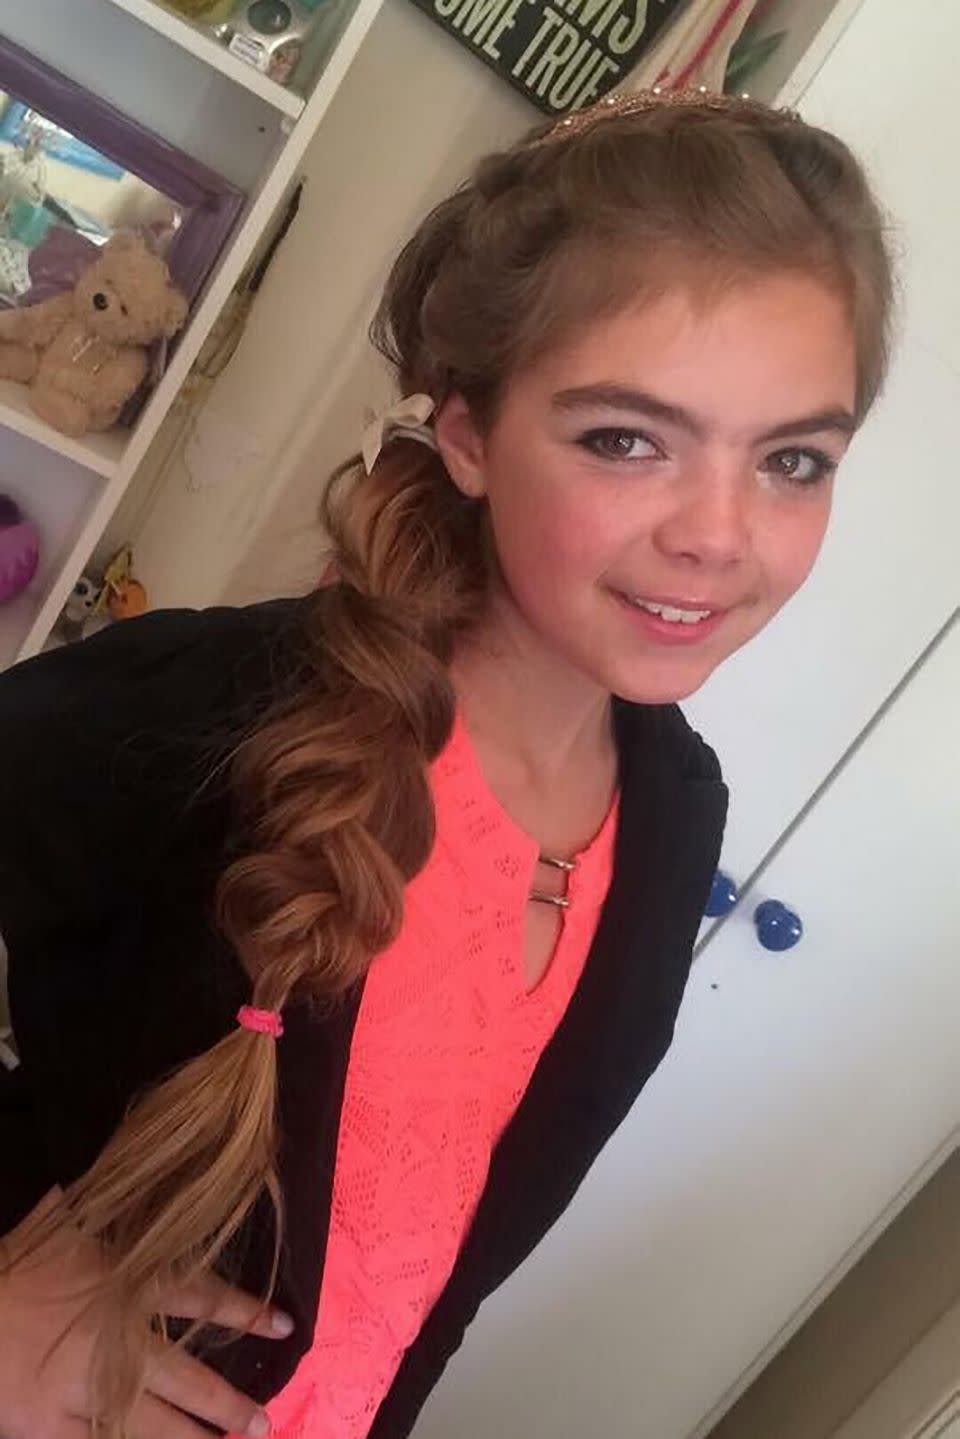 Aimee was left heartbroken by the change in her young daughter following the bullying. Photo: Caters